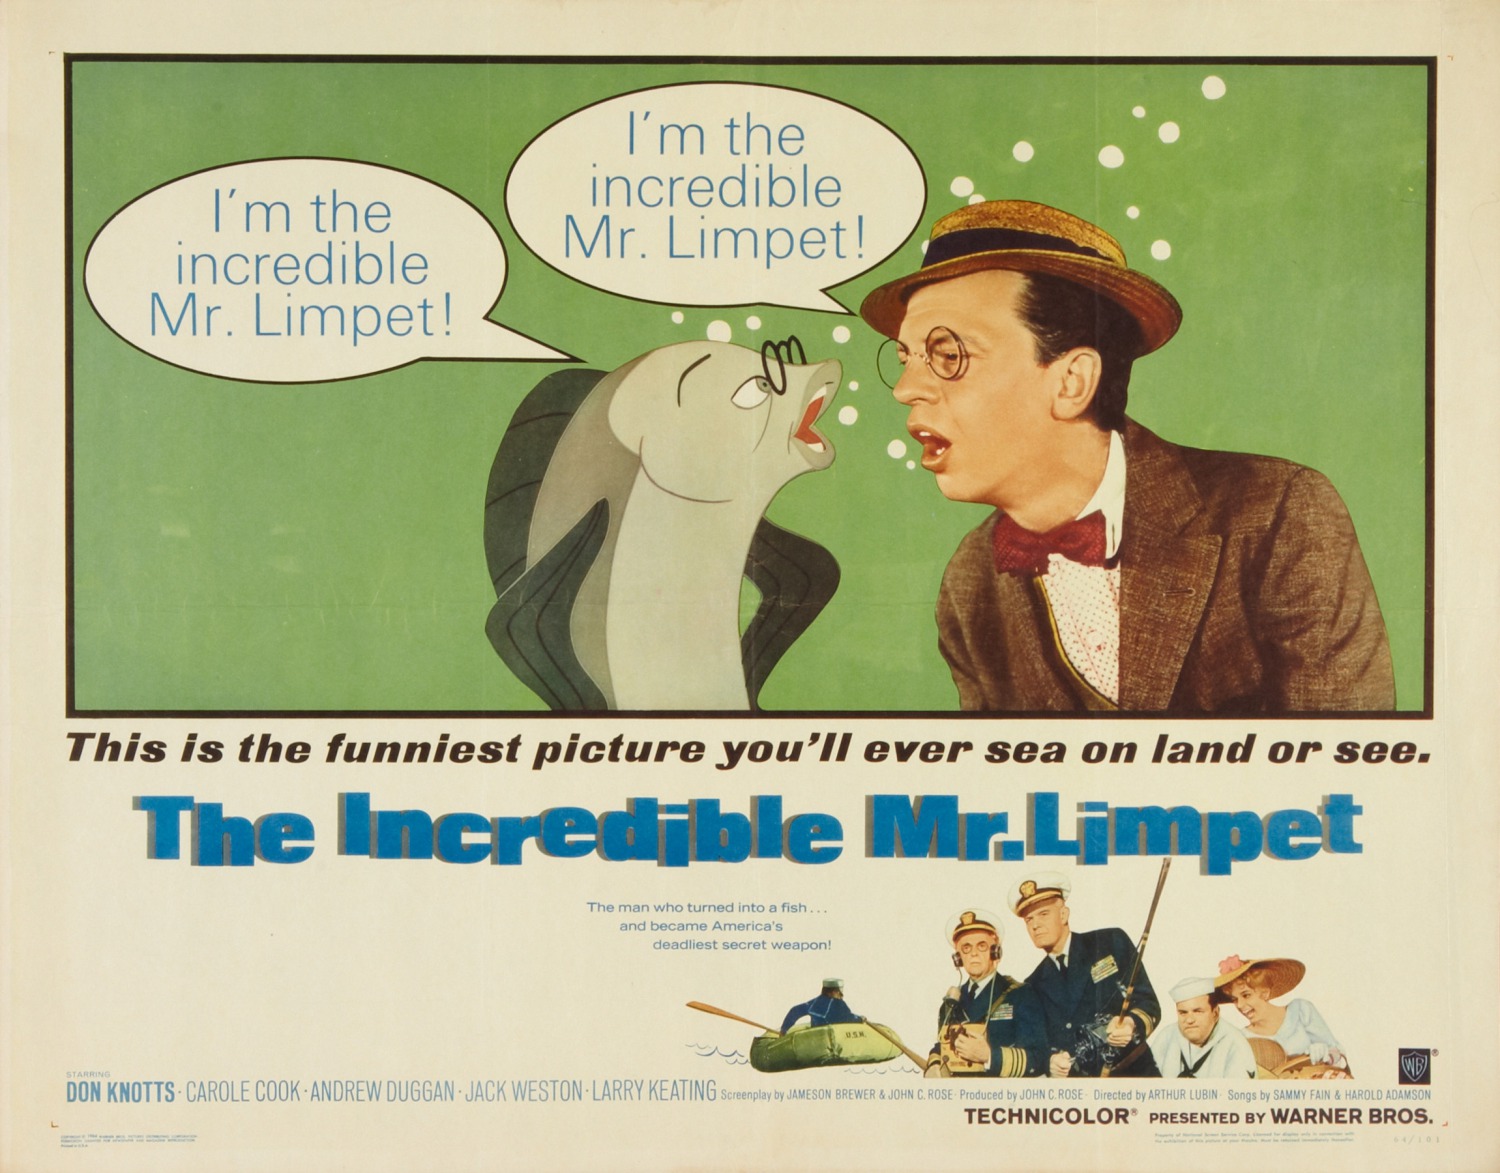 Image for The Incredible Mr. Limpet (#3 of 3). Return to the main poster pa...